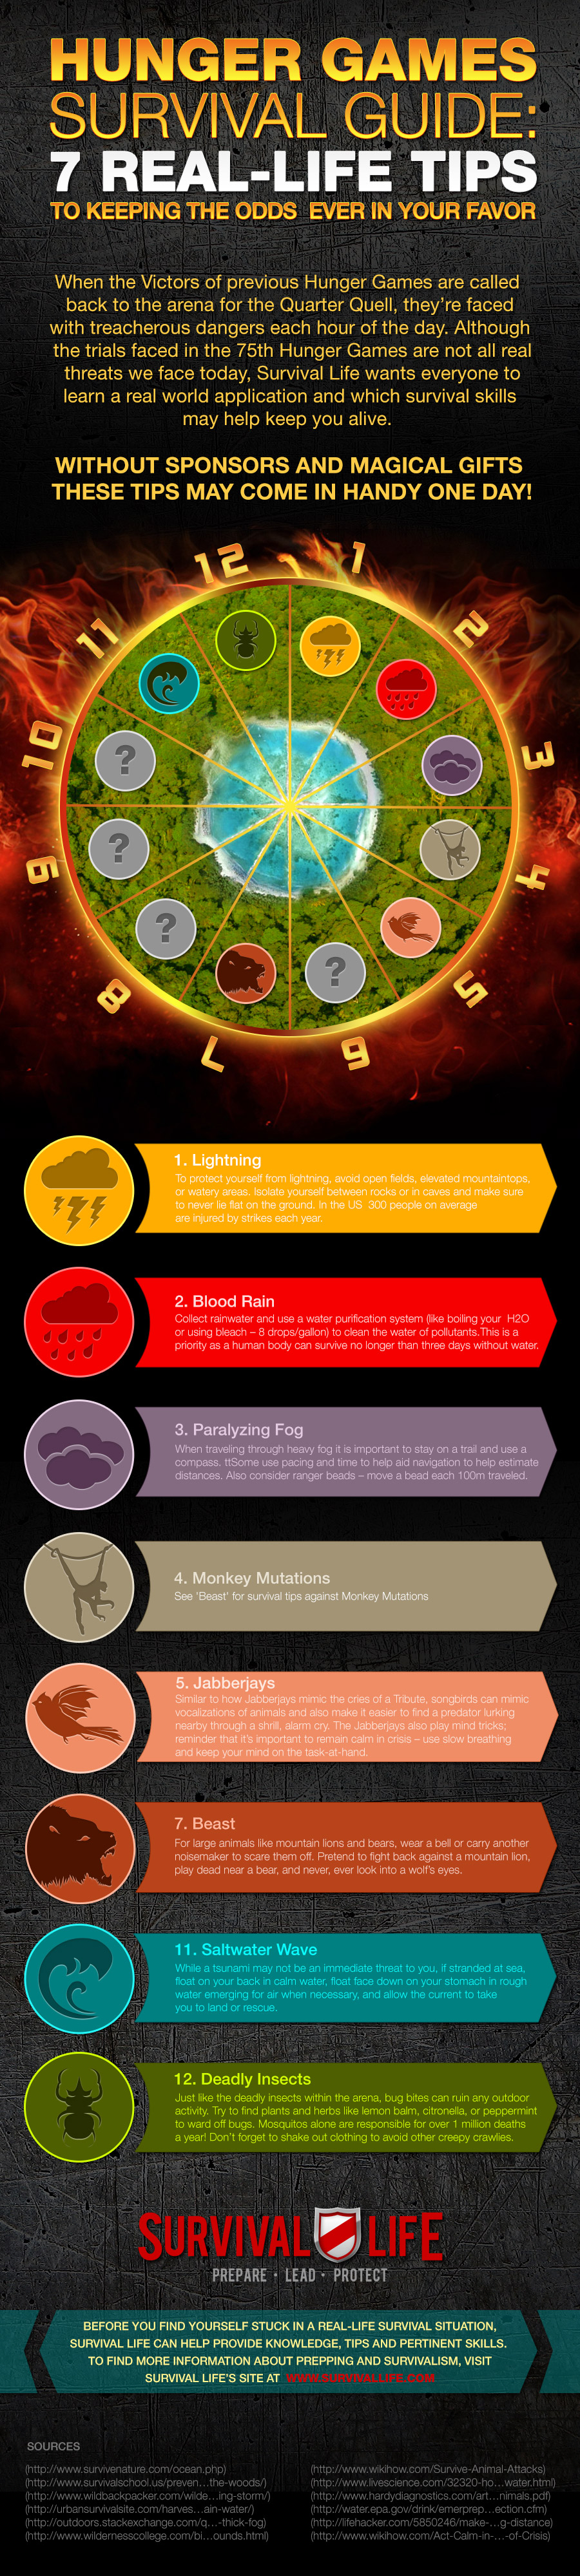 A Guide To The Hunger Games Books In Order [Infographic] - Venngage